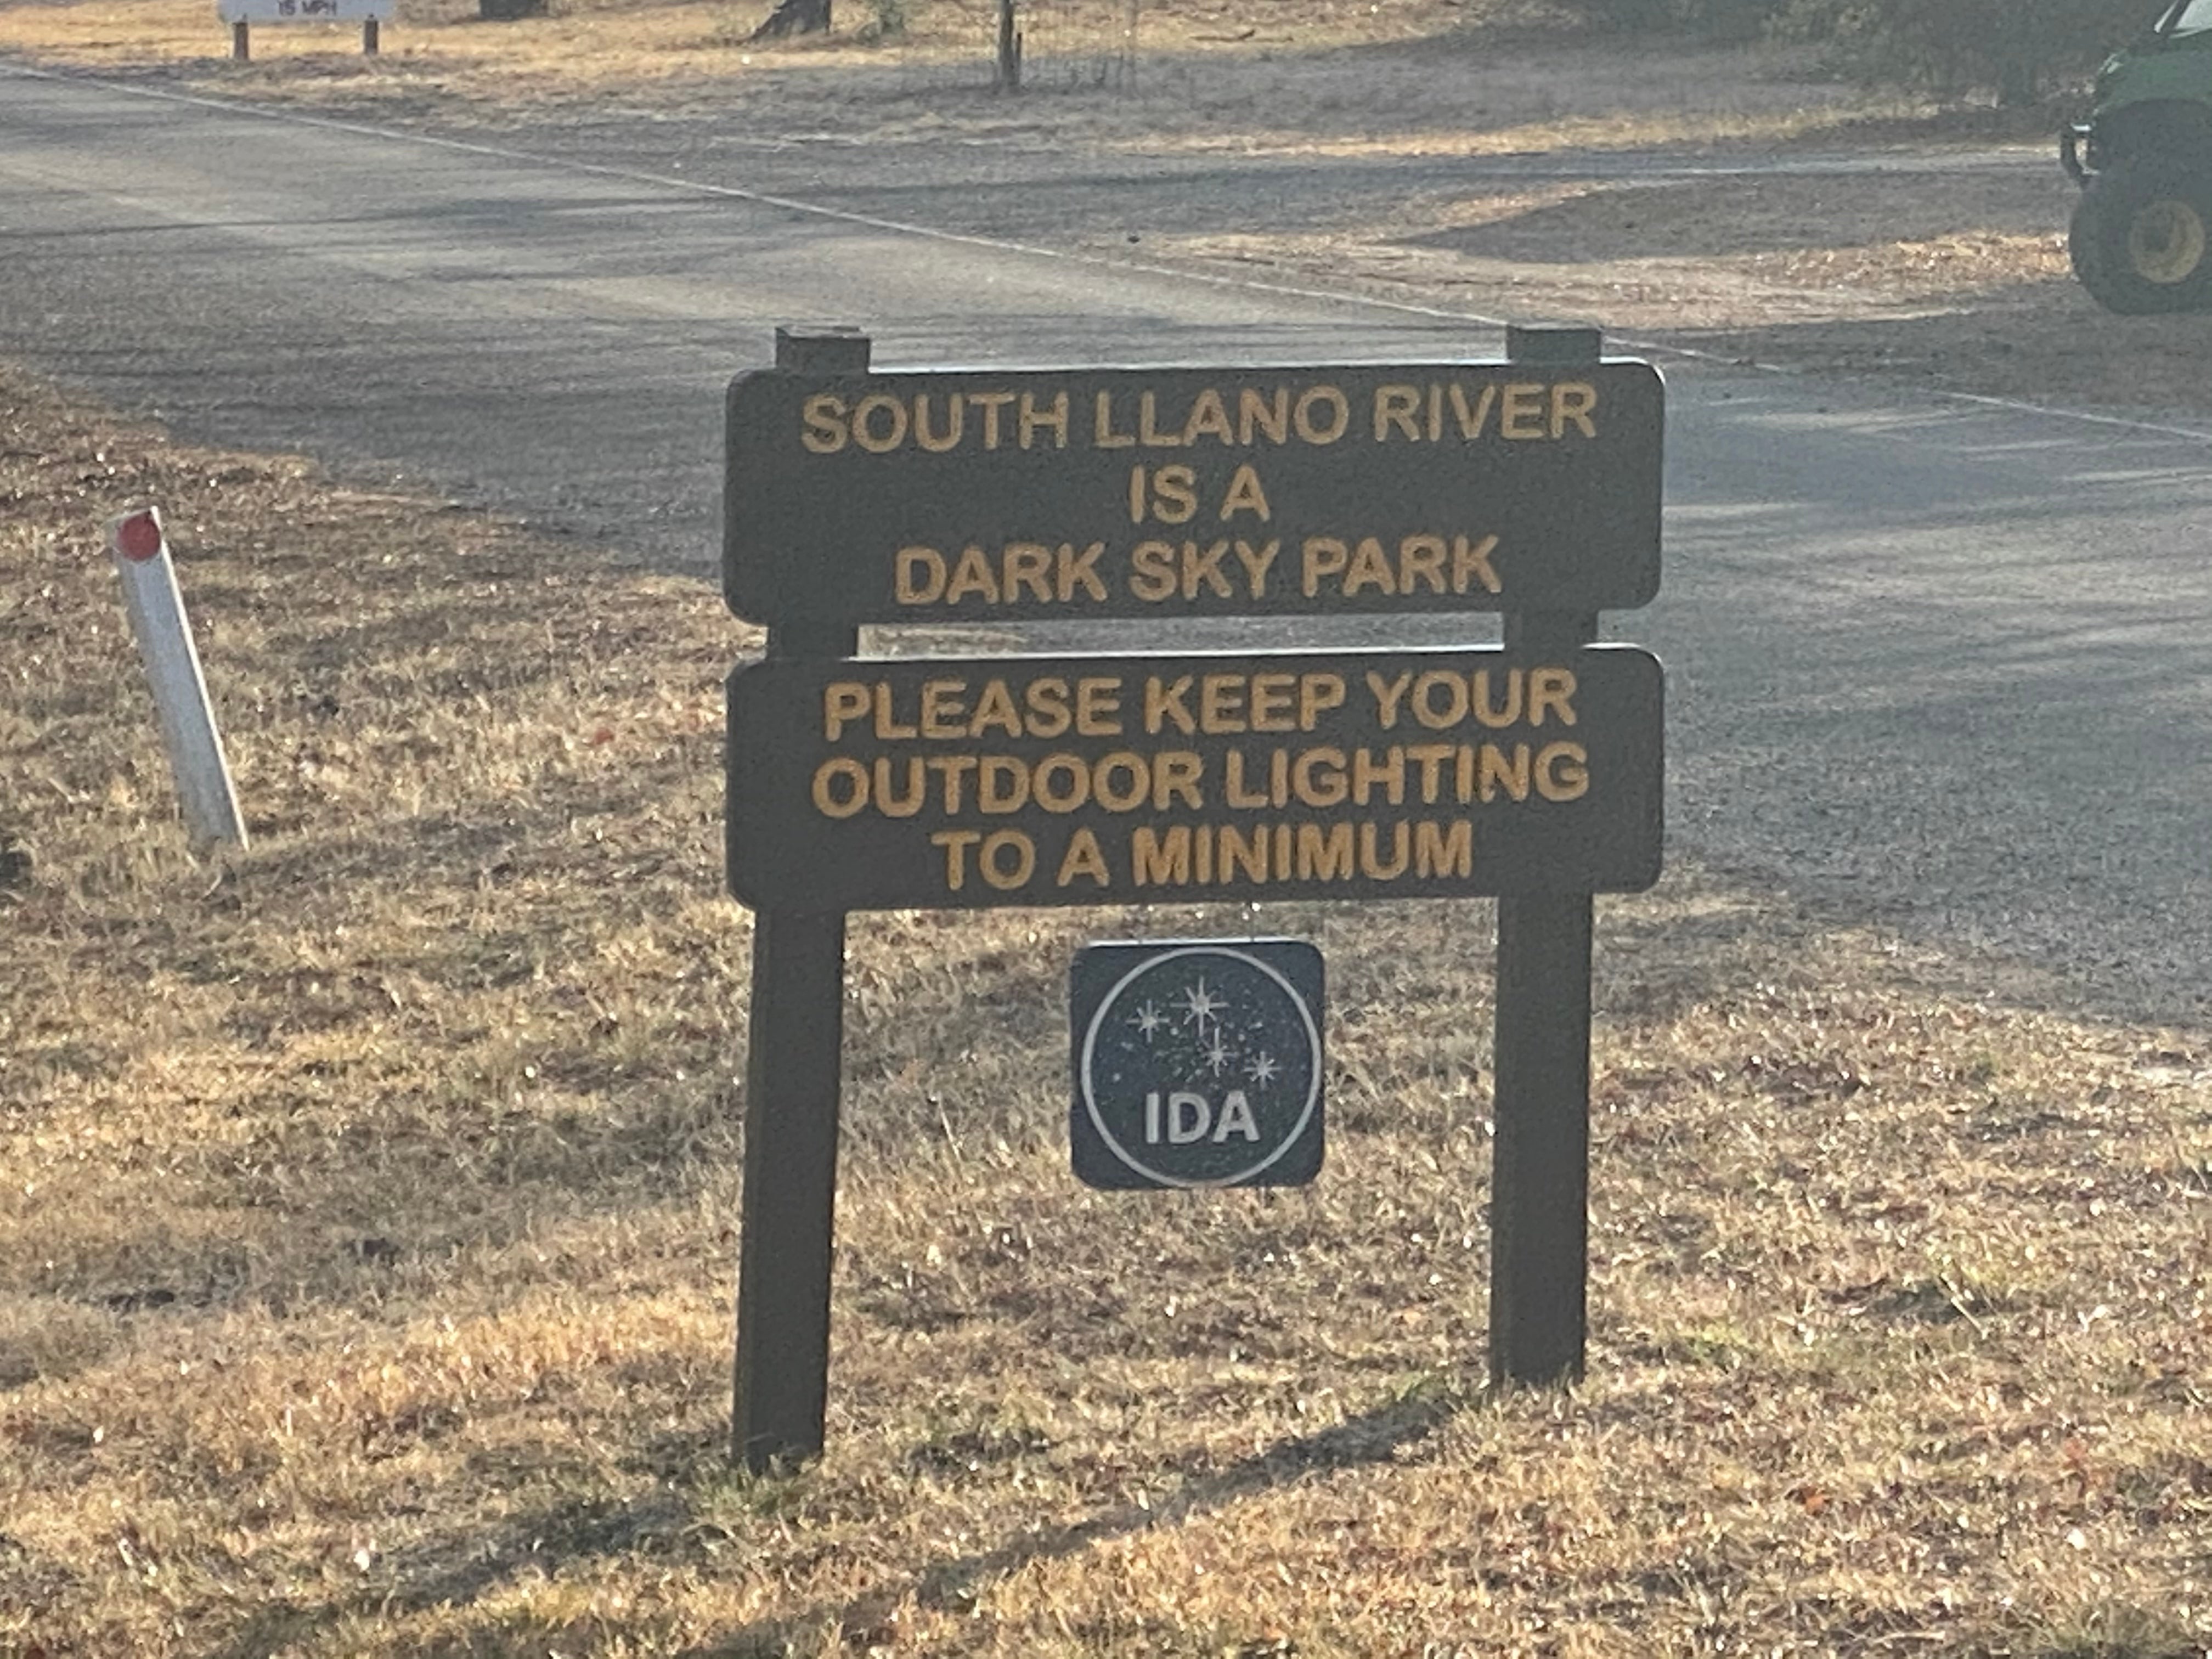 Camper submitted image from South Llano River State Park - 1